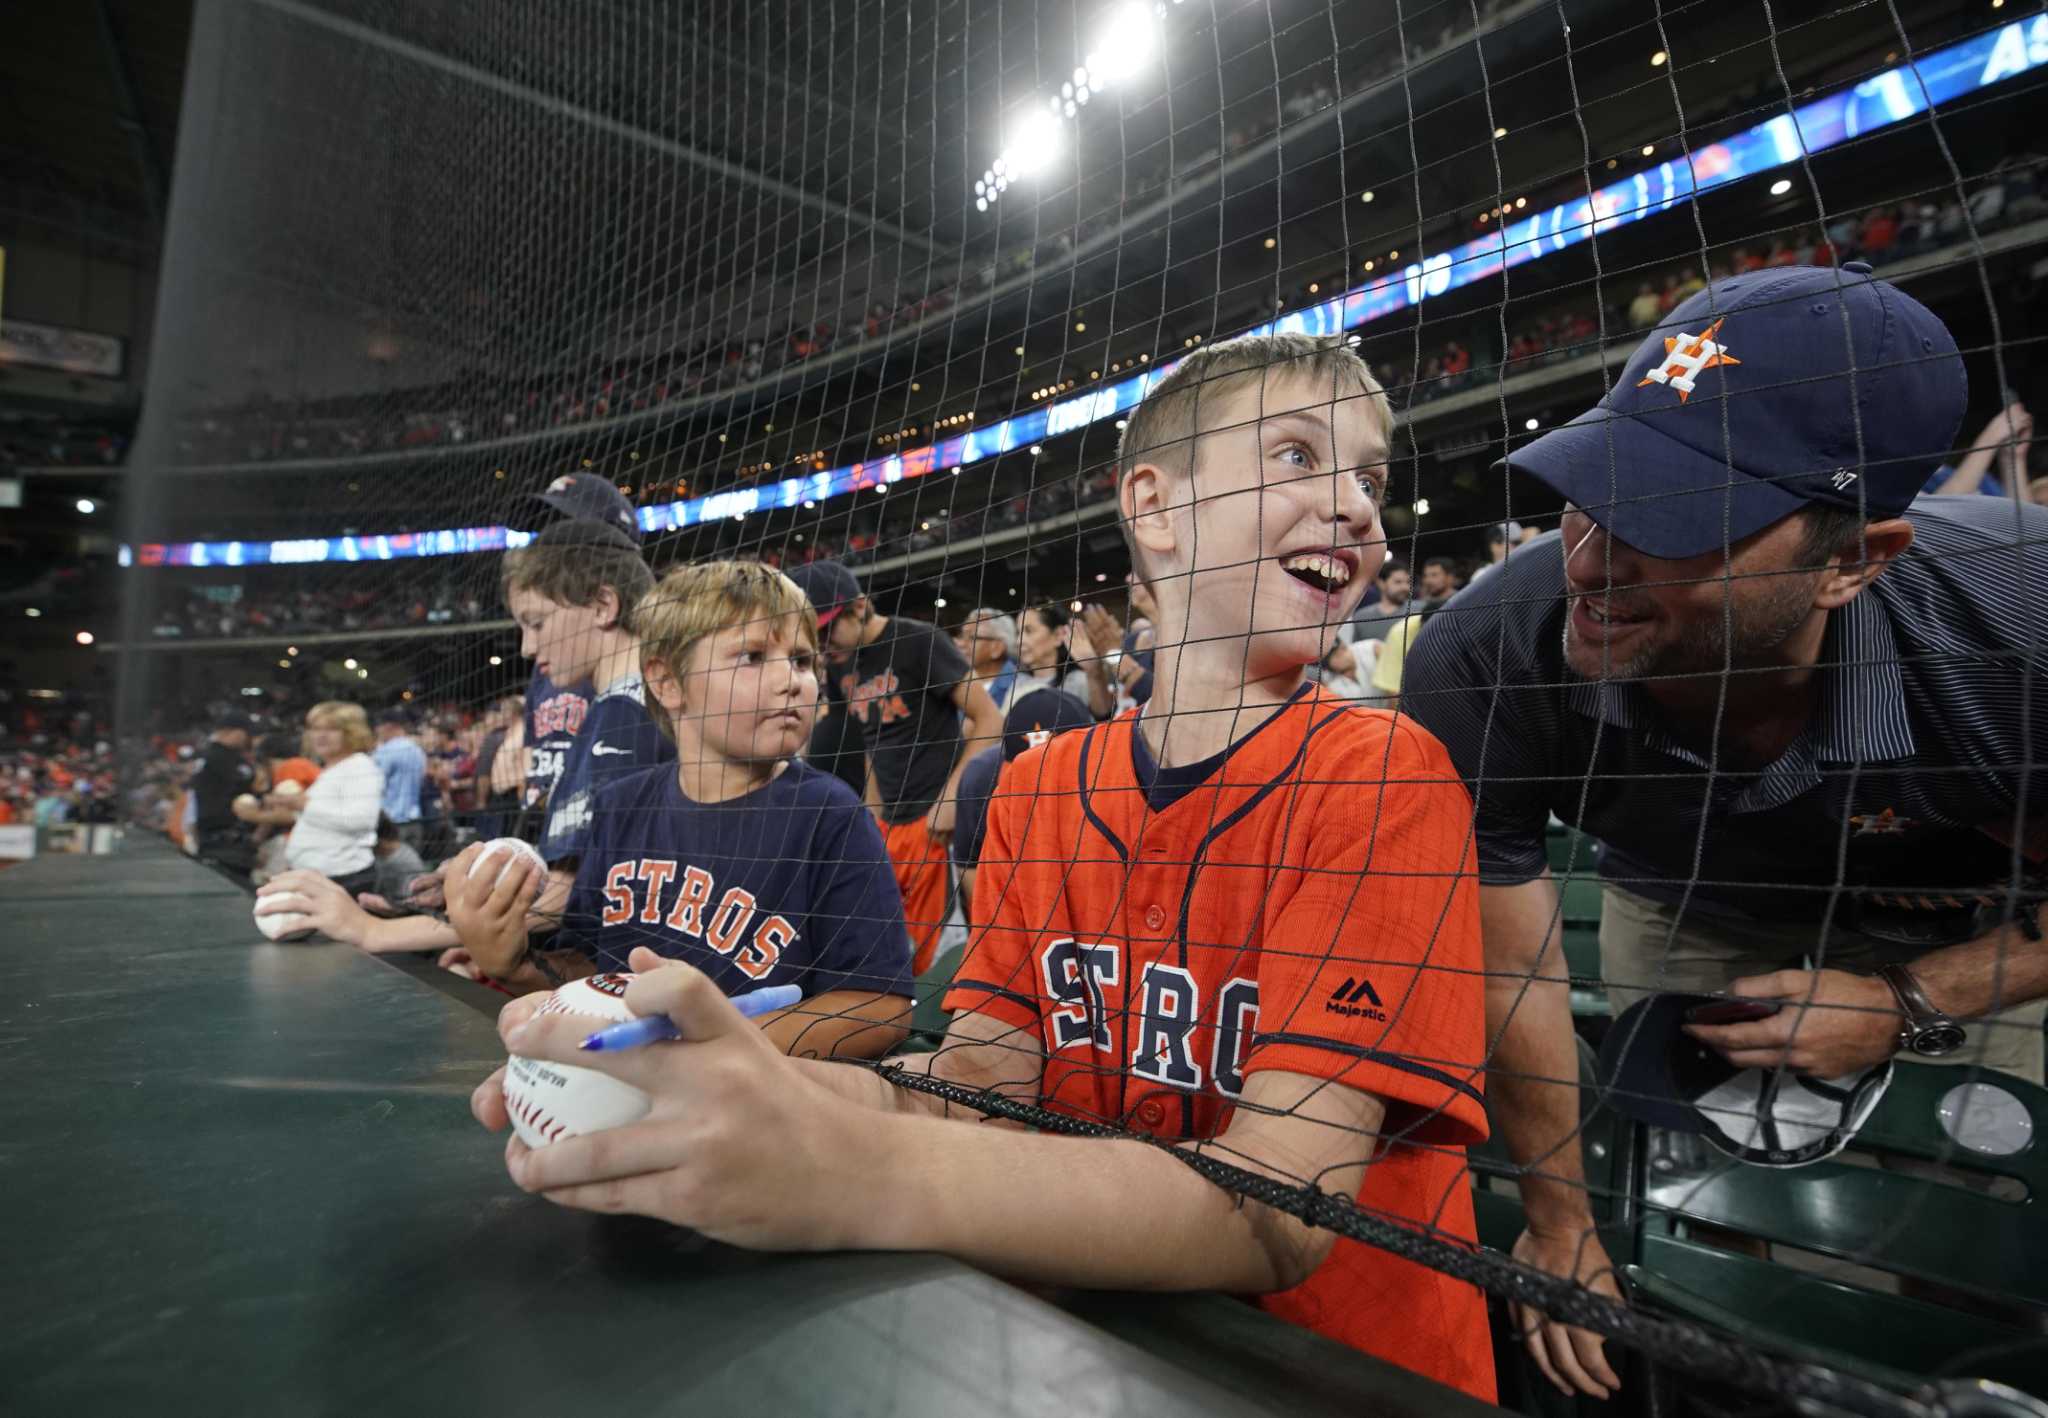 Houston Astros offer up Minute Maid Park stadium seats to lucky